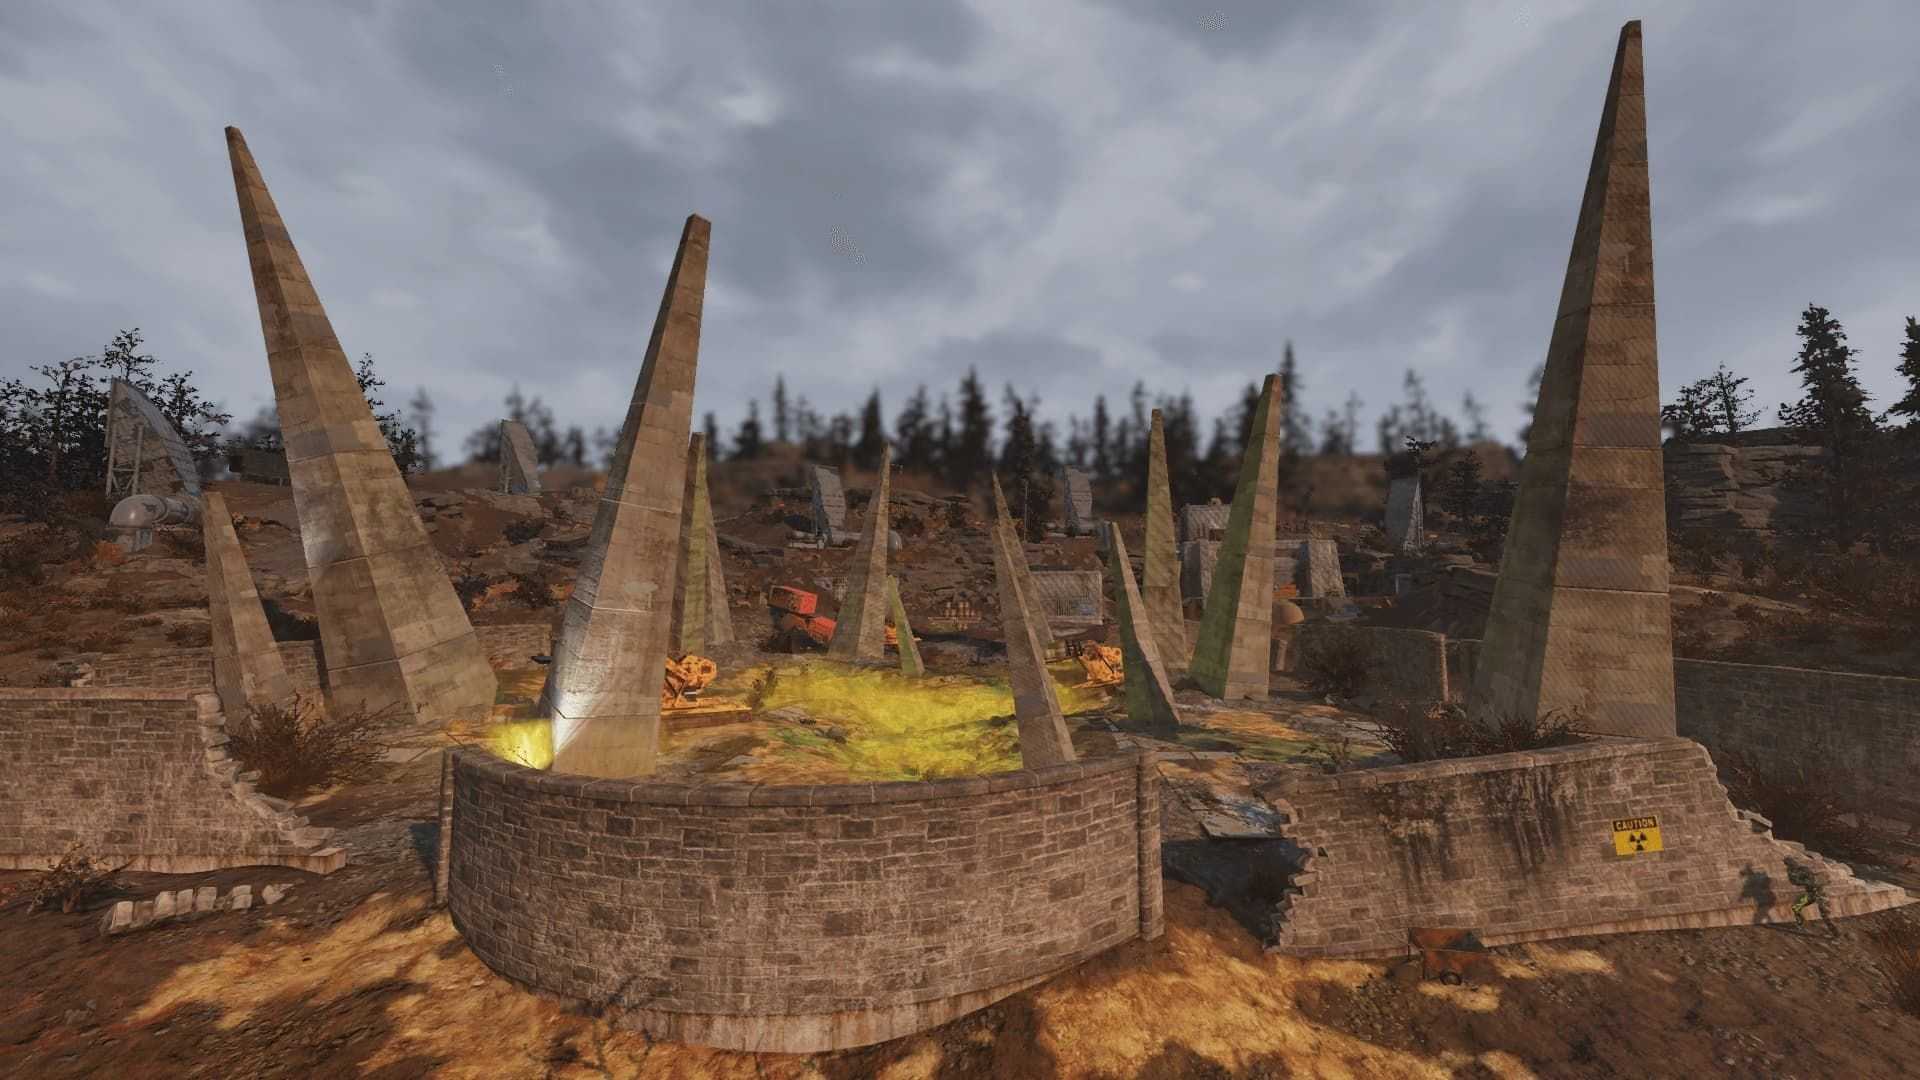 The wastes at the Disposal Field attract Super Mutants to the location (Image via Bethesda)